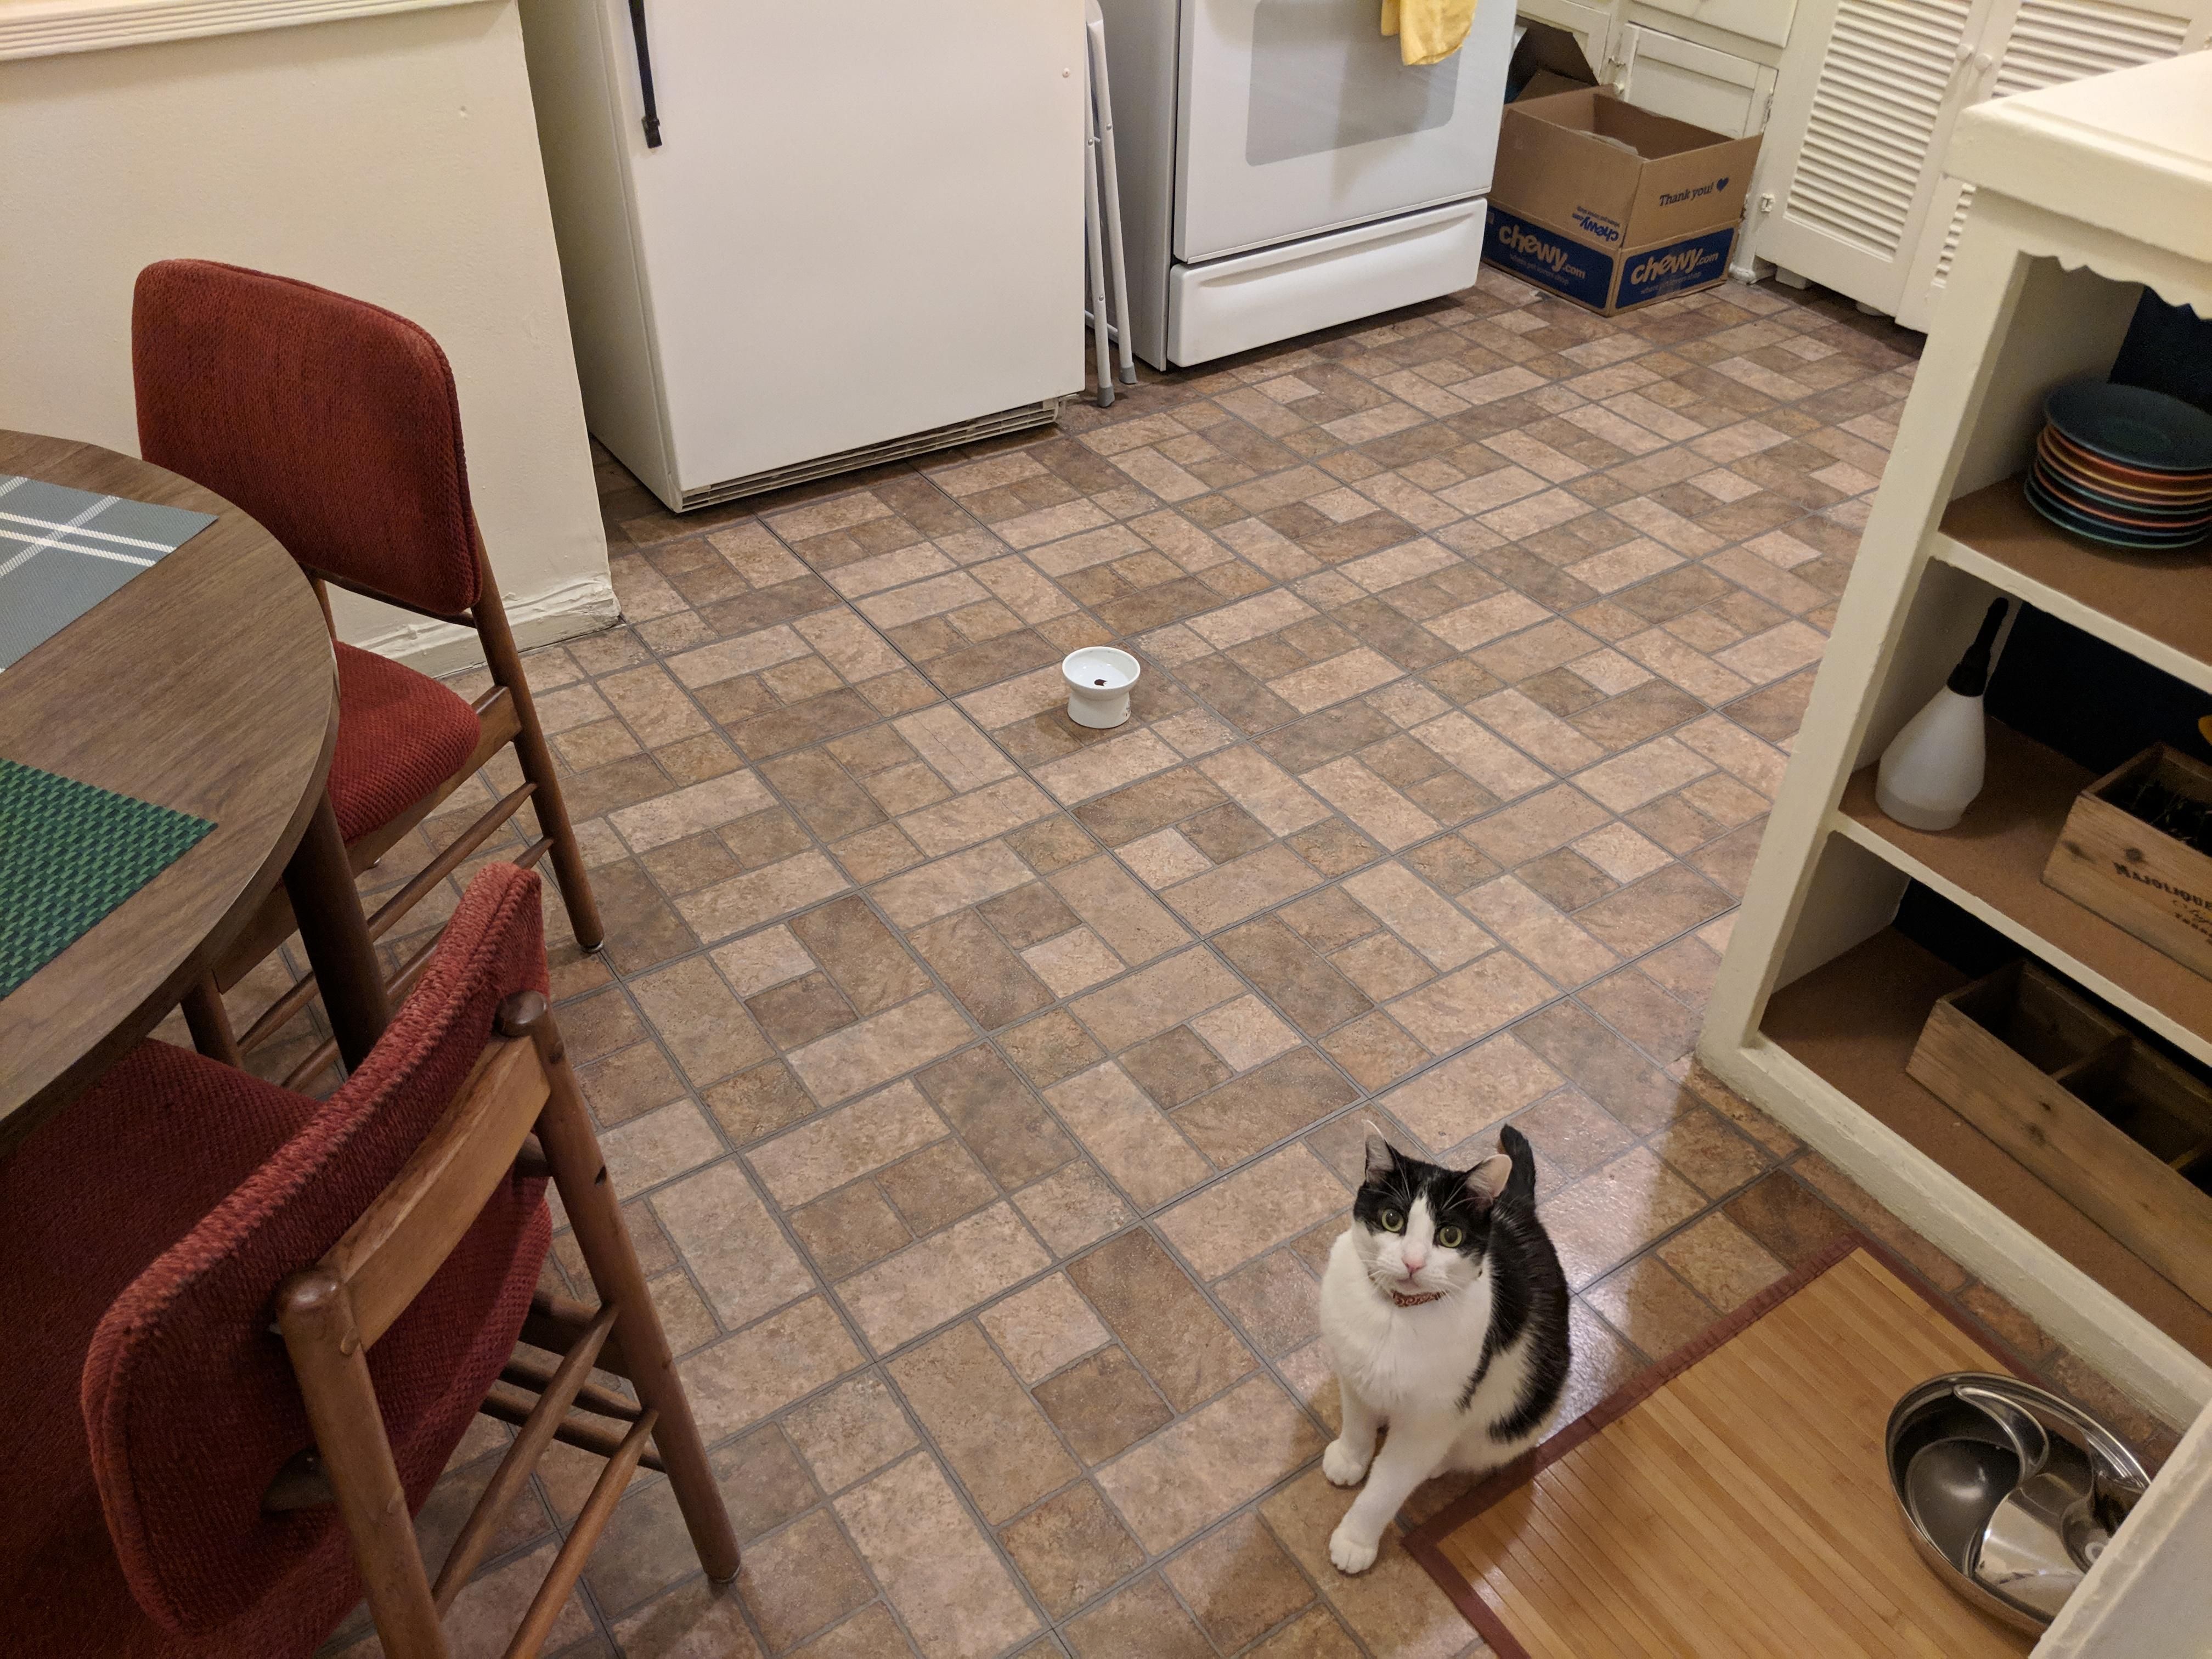 When he's hungry he'll slowly move his bowl to the center of the kitchen so I dont forget to feed him.